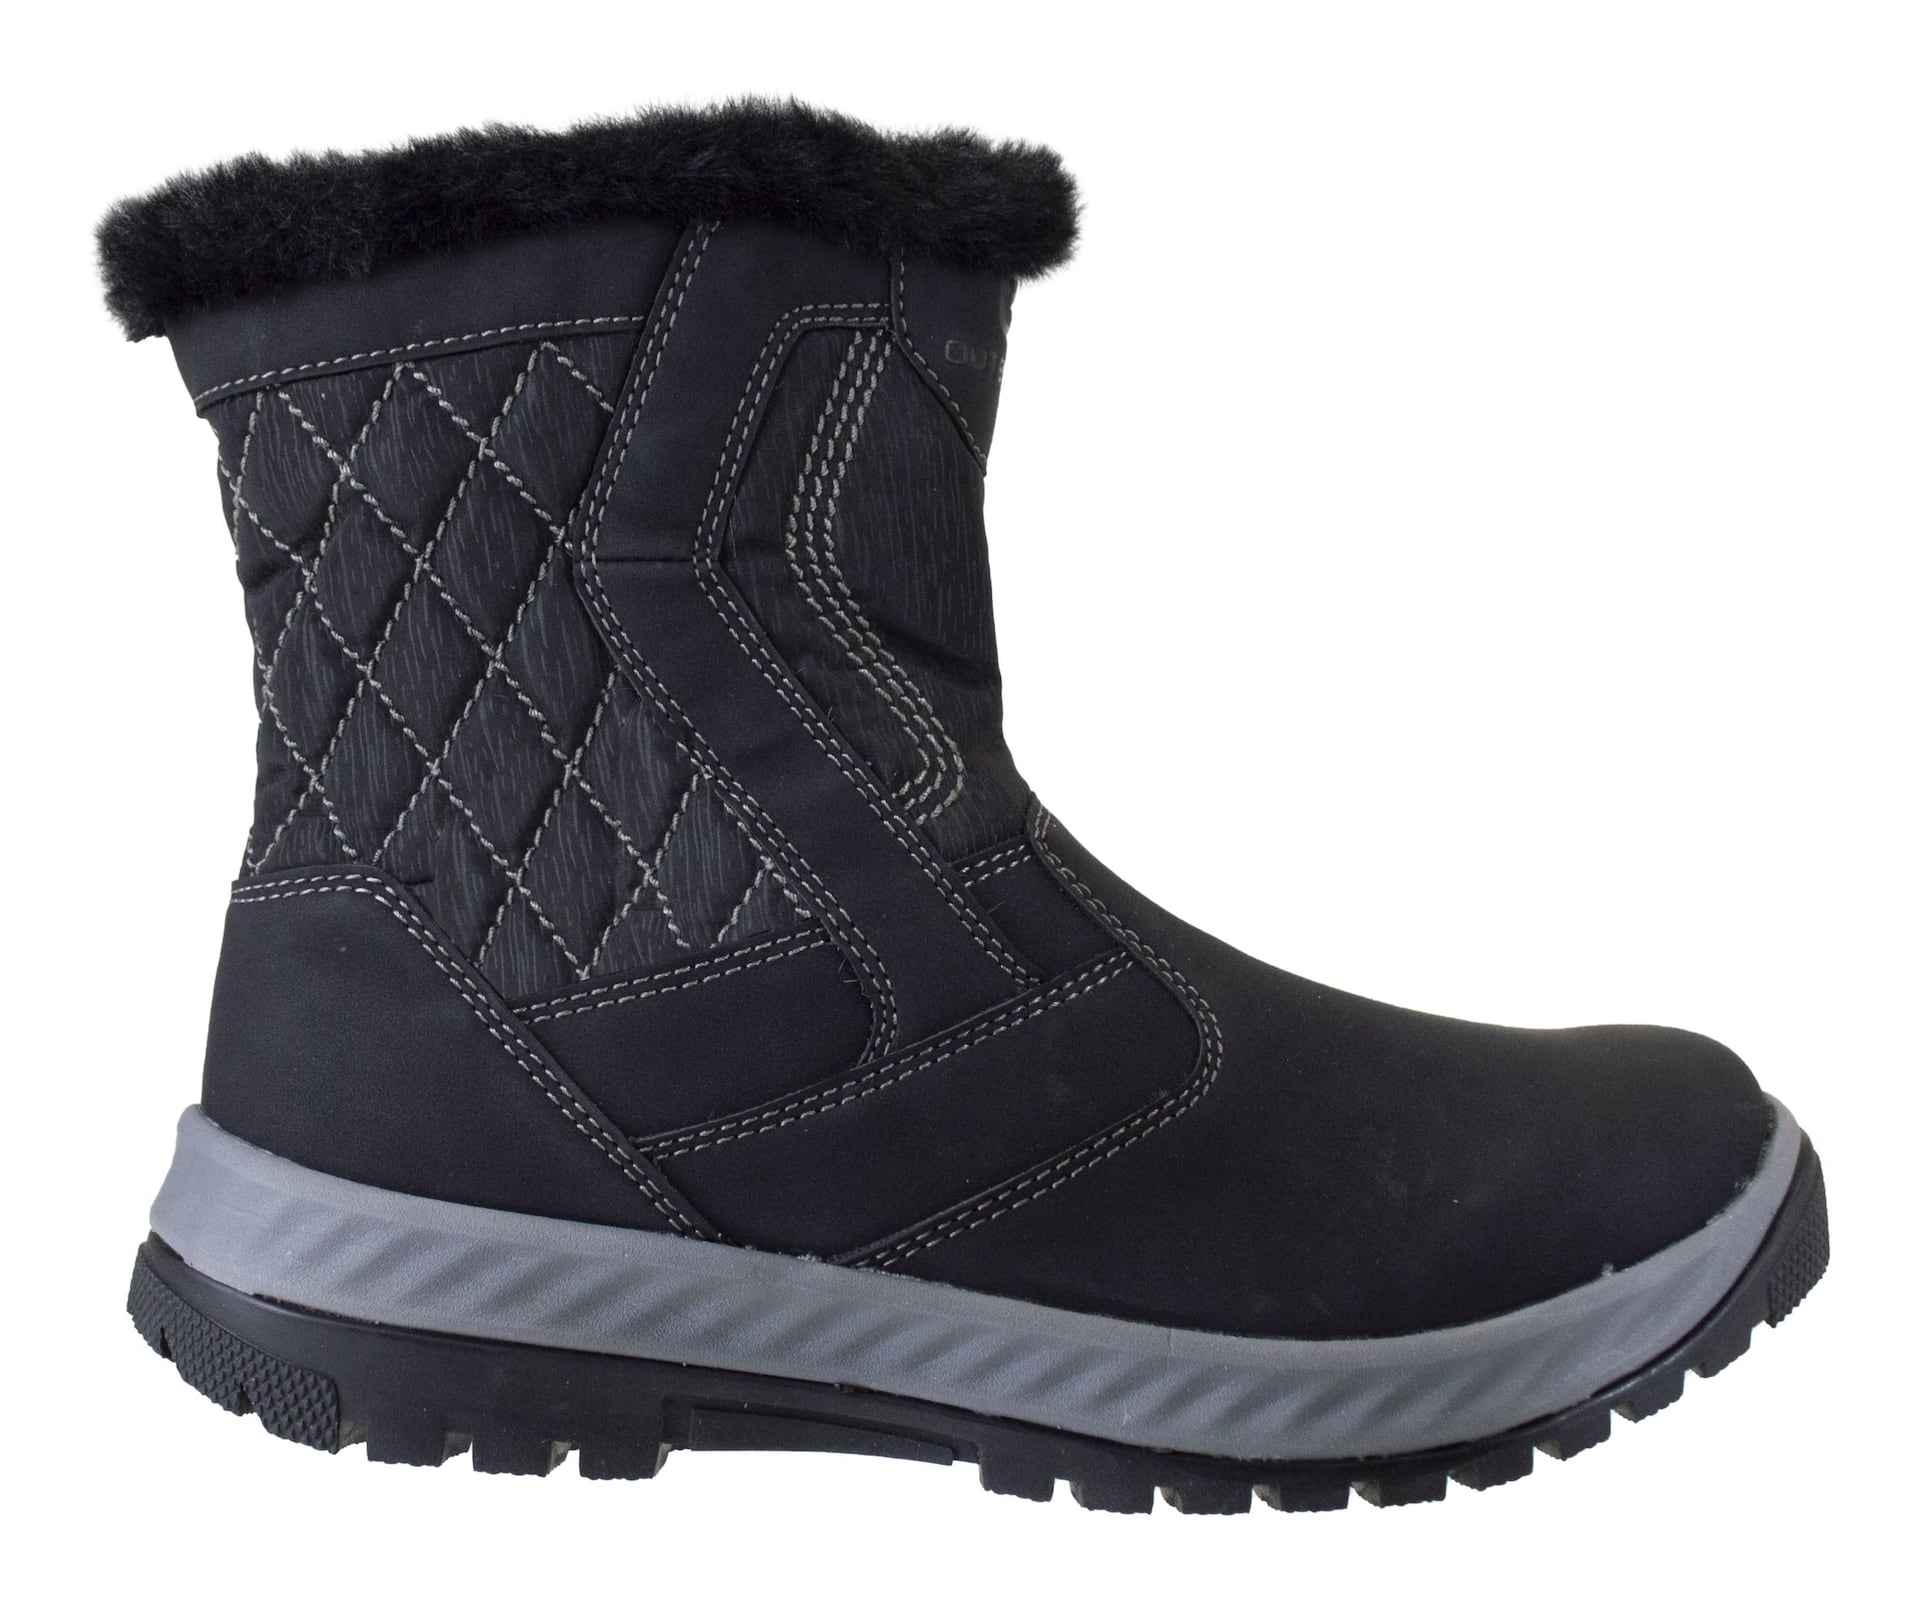 Outbound Women's Laila Insulated Zip-Up PU Leather Winter Snow Boots Faux  Fur Lined, Black